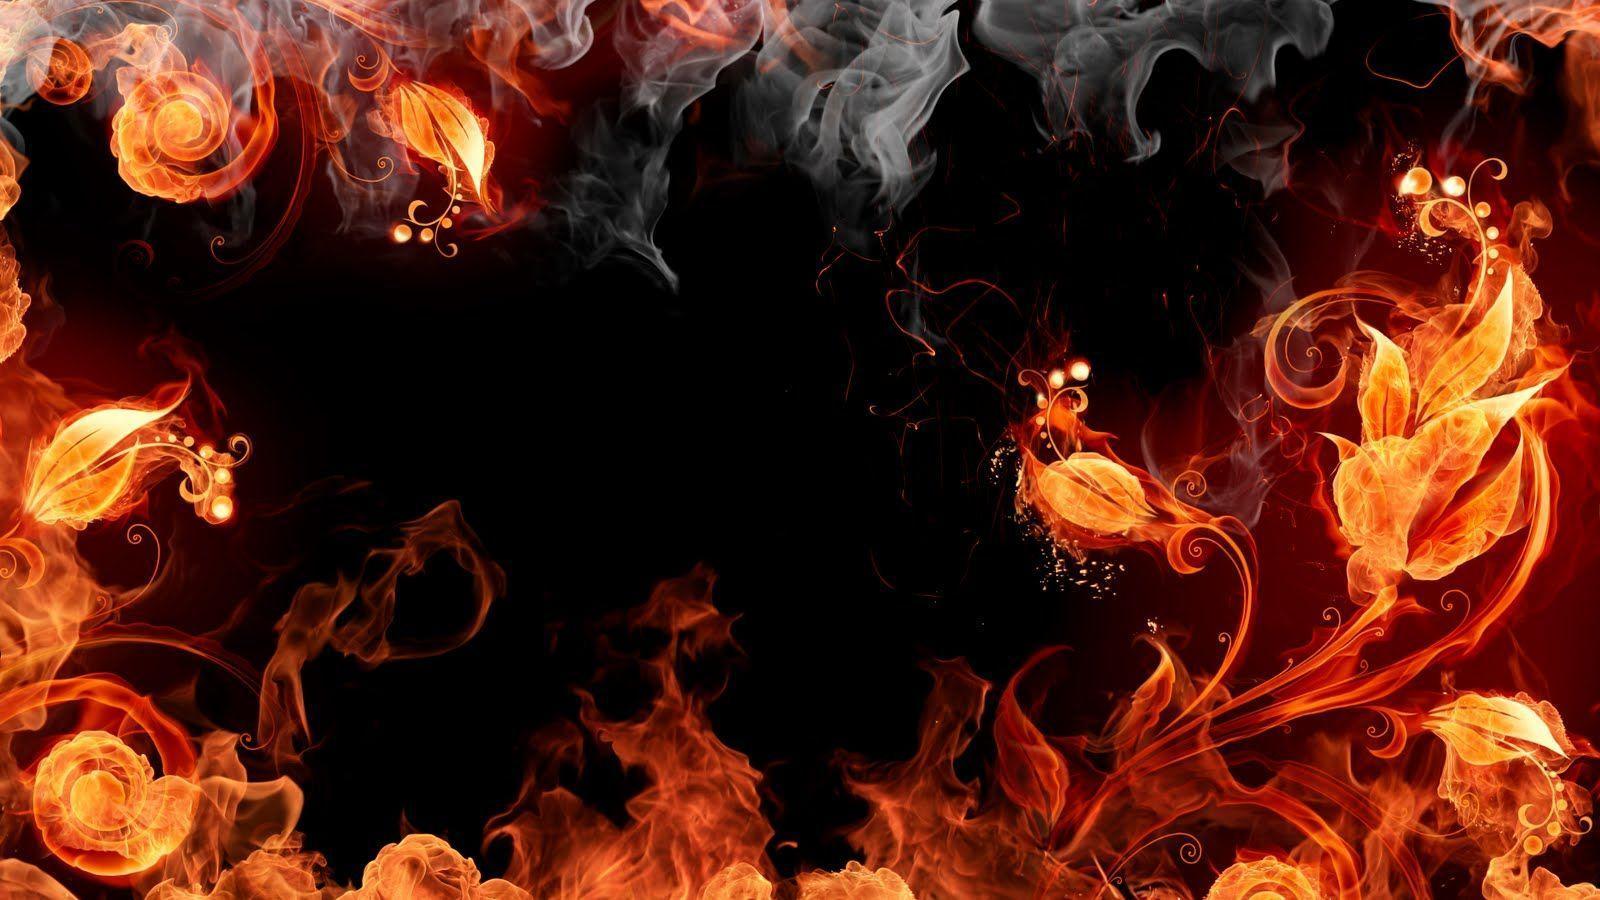 Red Fire Background, wallpaper, Red Fire Backgrounds hd wallpapers